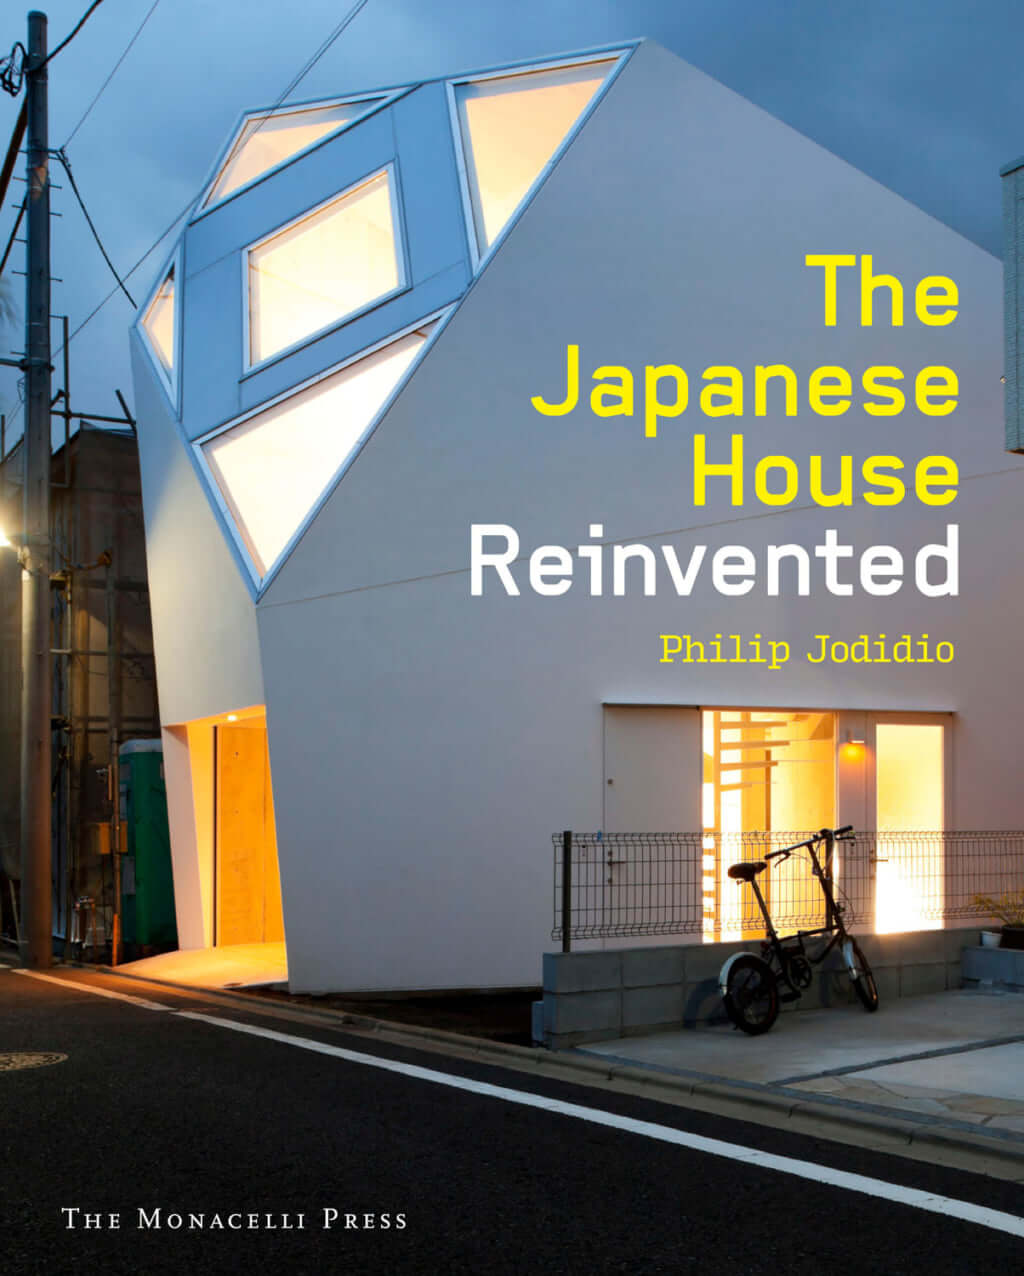 The Modern Japanese Home, Withstanding